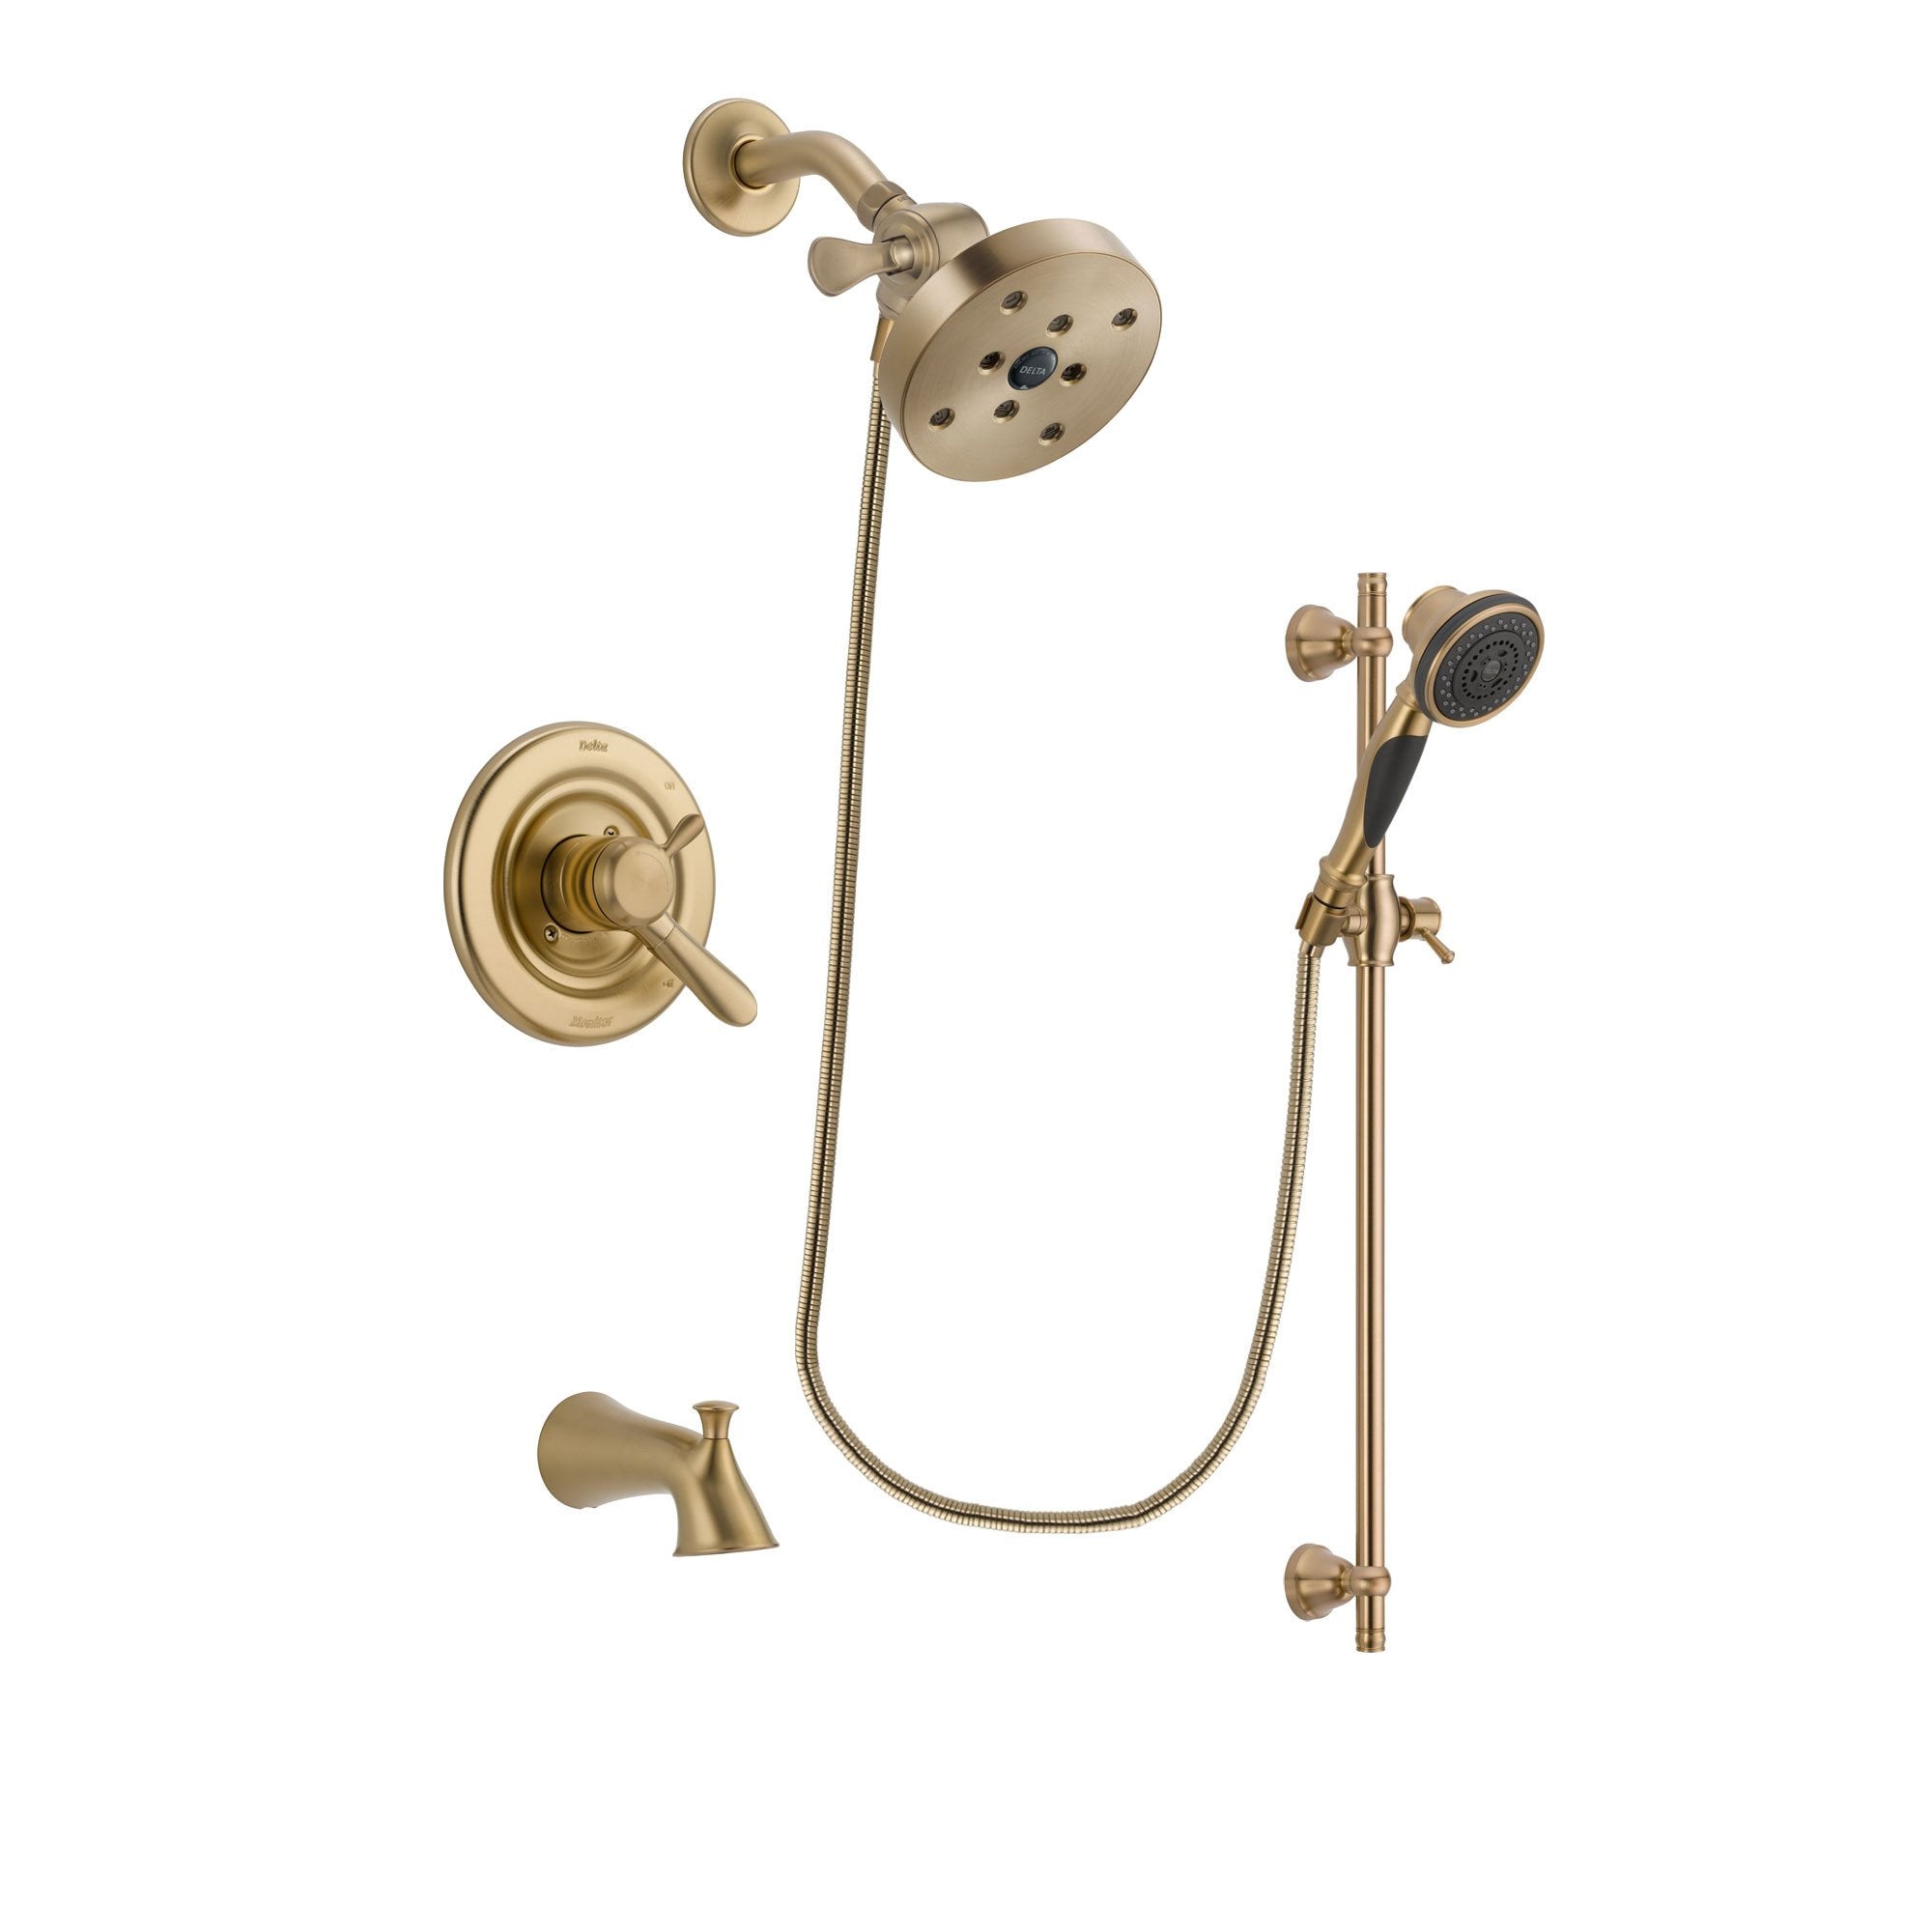 Delta Lahara Champagne Bronze Finish Dual Control Tub and Shower Faucet System Package with 5-1/2 inch Showerhead and Personal Handheld Shower Spray with Slide Bar Includes Rough-in Valve and Tub Spout DSP3619V